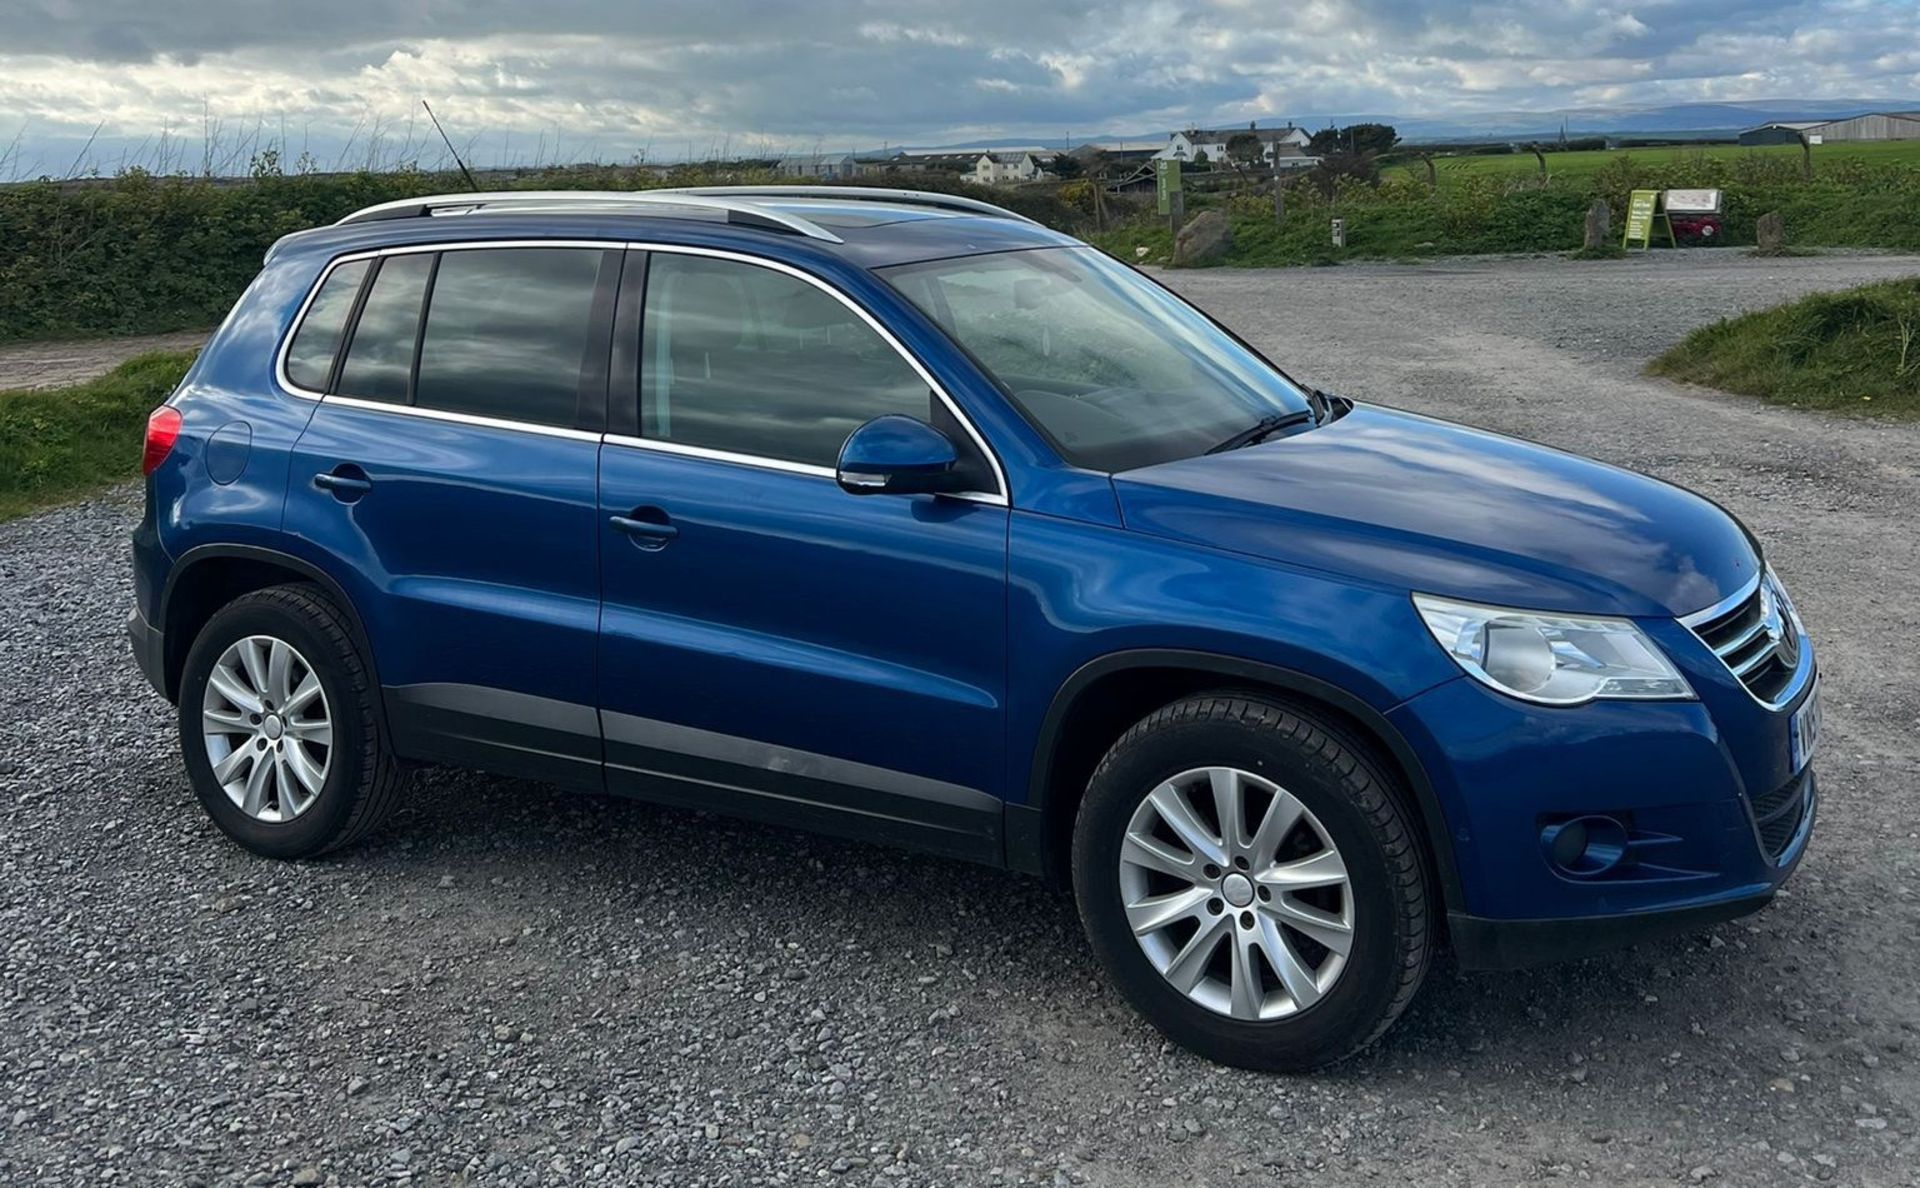 2008 Volkswagen Tiguan SE Tdi 140 - Sport pan roof with 12 months MOT - Offered at No Reserve - Image 3 of 16